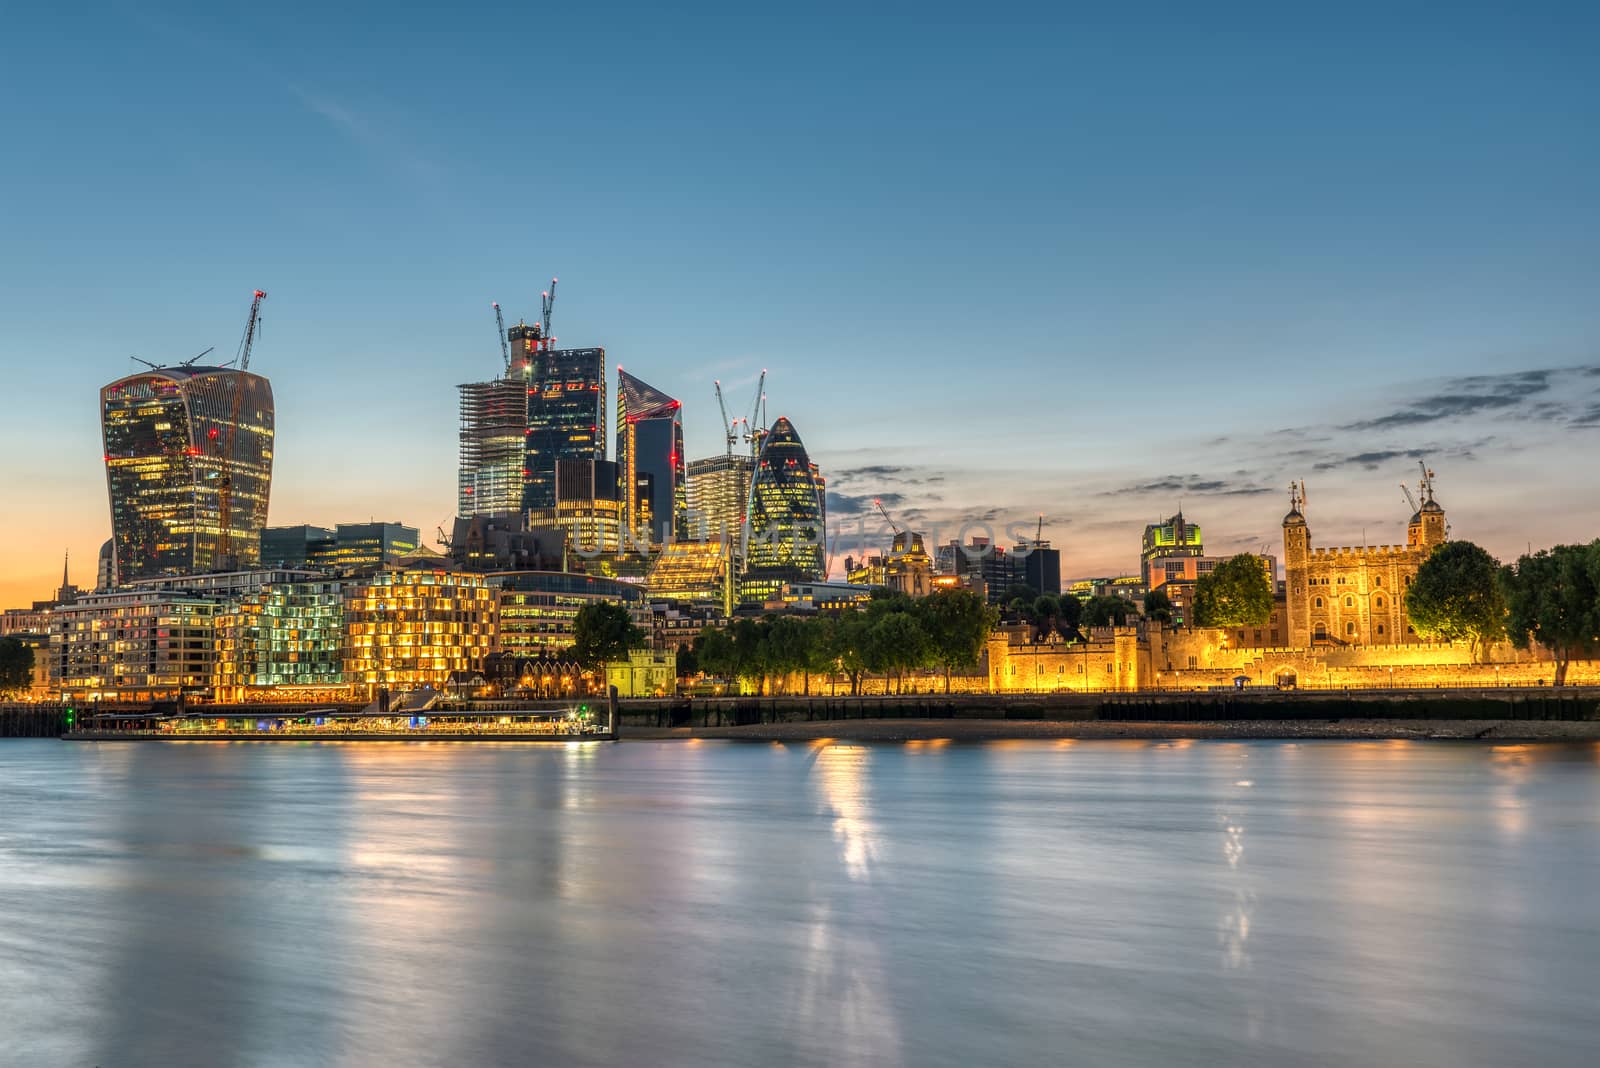 The skyscrapers of the City and the Tower of London after sunset